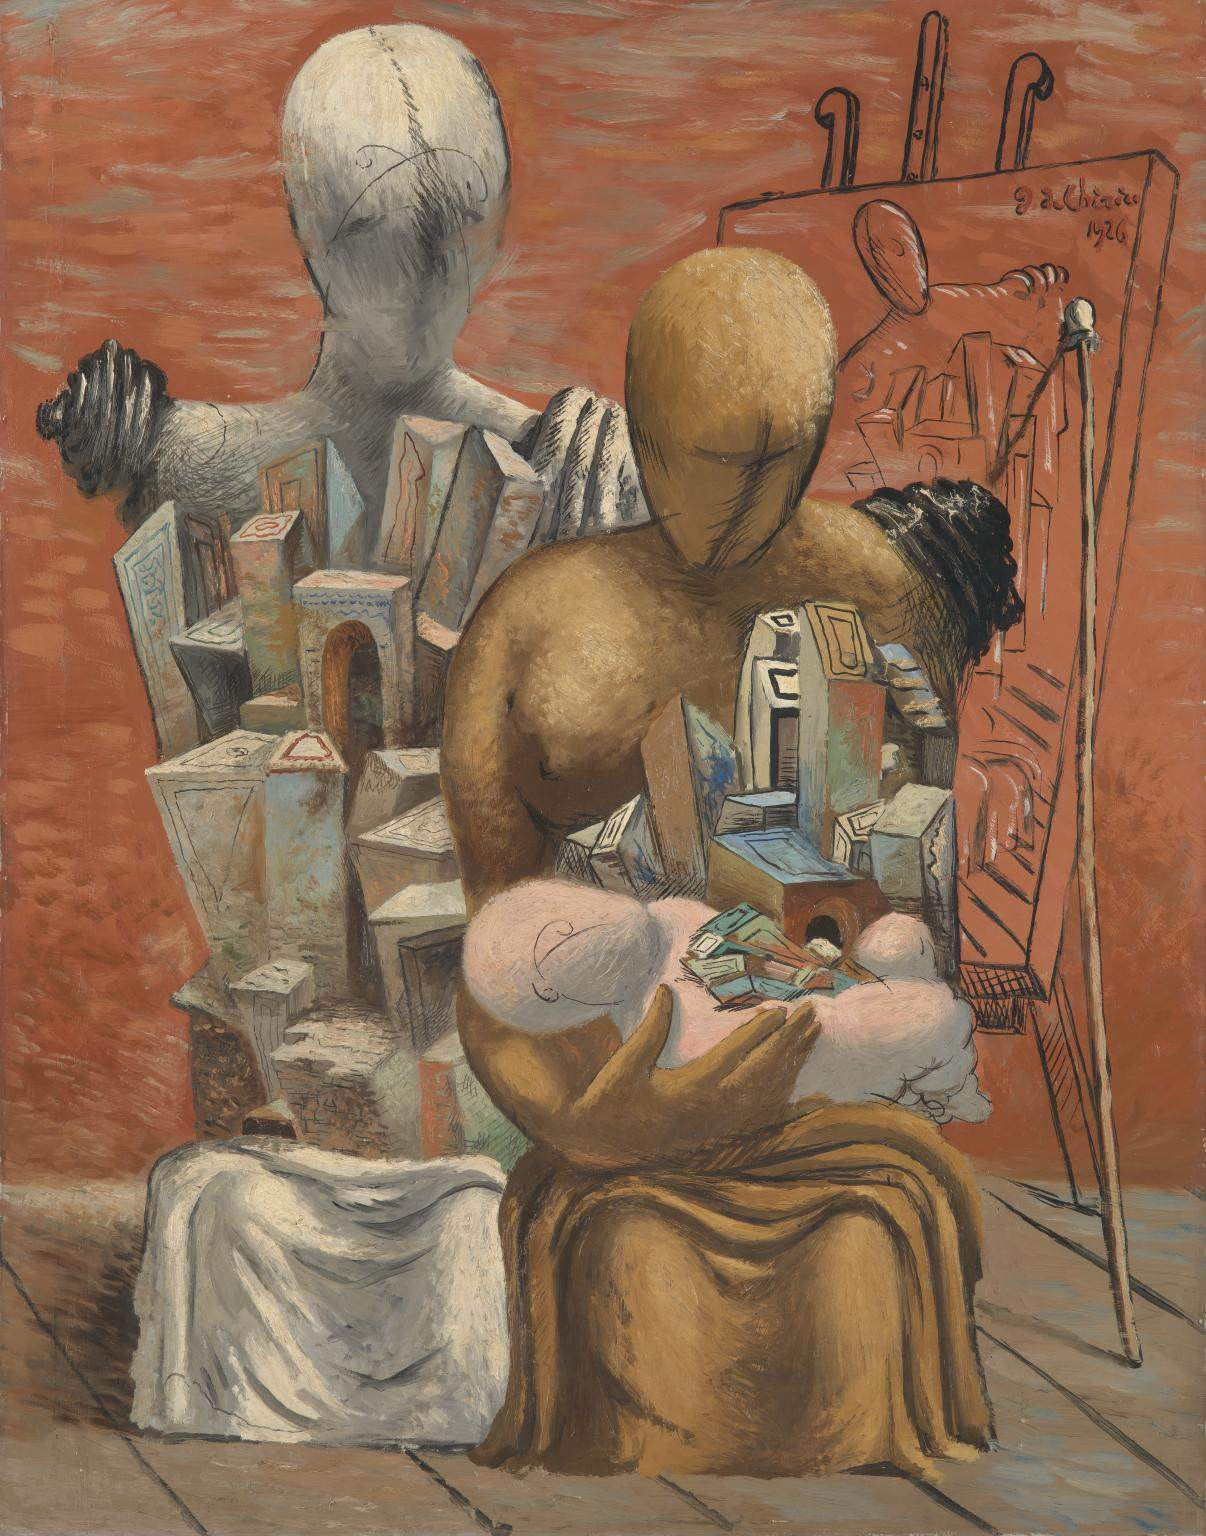 An early magic realistic painting by Giorgio de Chirico, The Painter's Family (1926), Tate